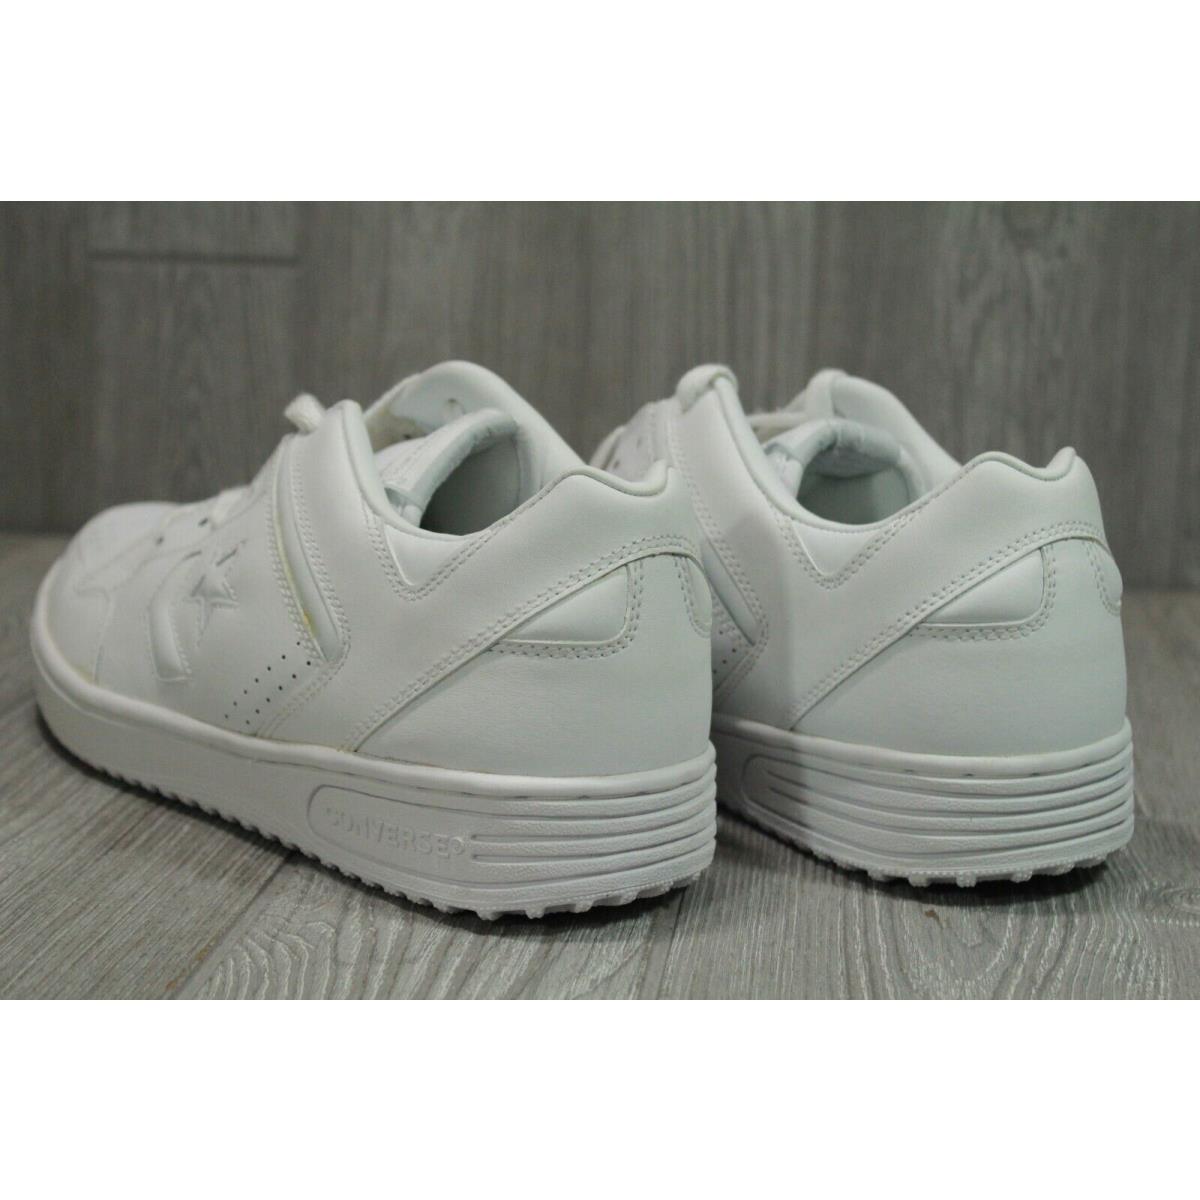 Converse shoes Weapon - White 2